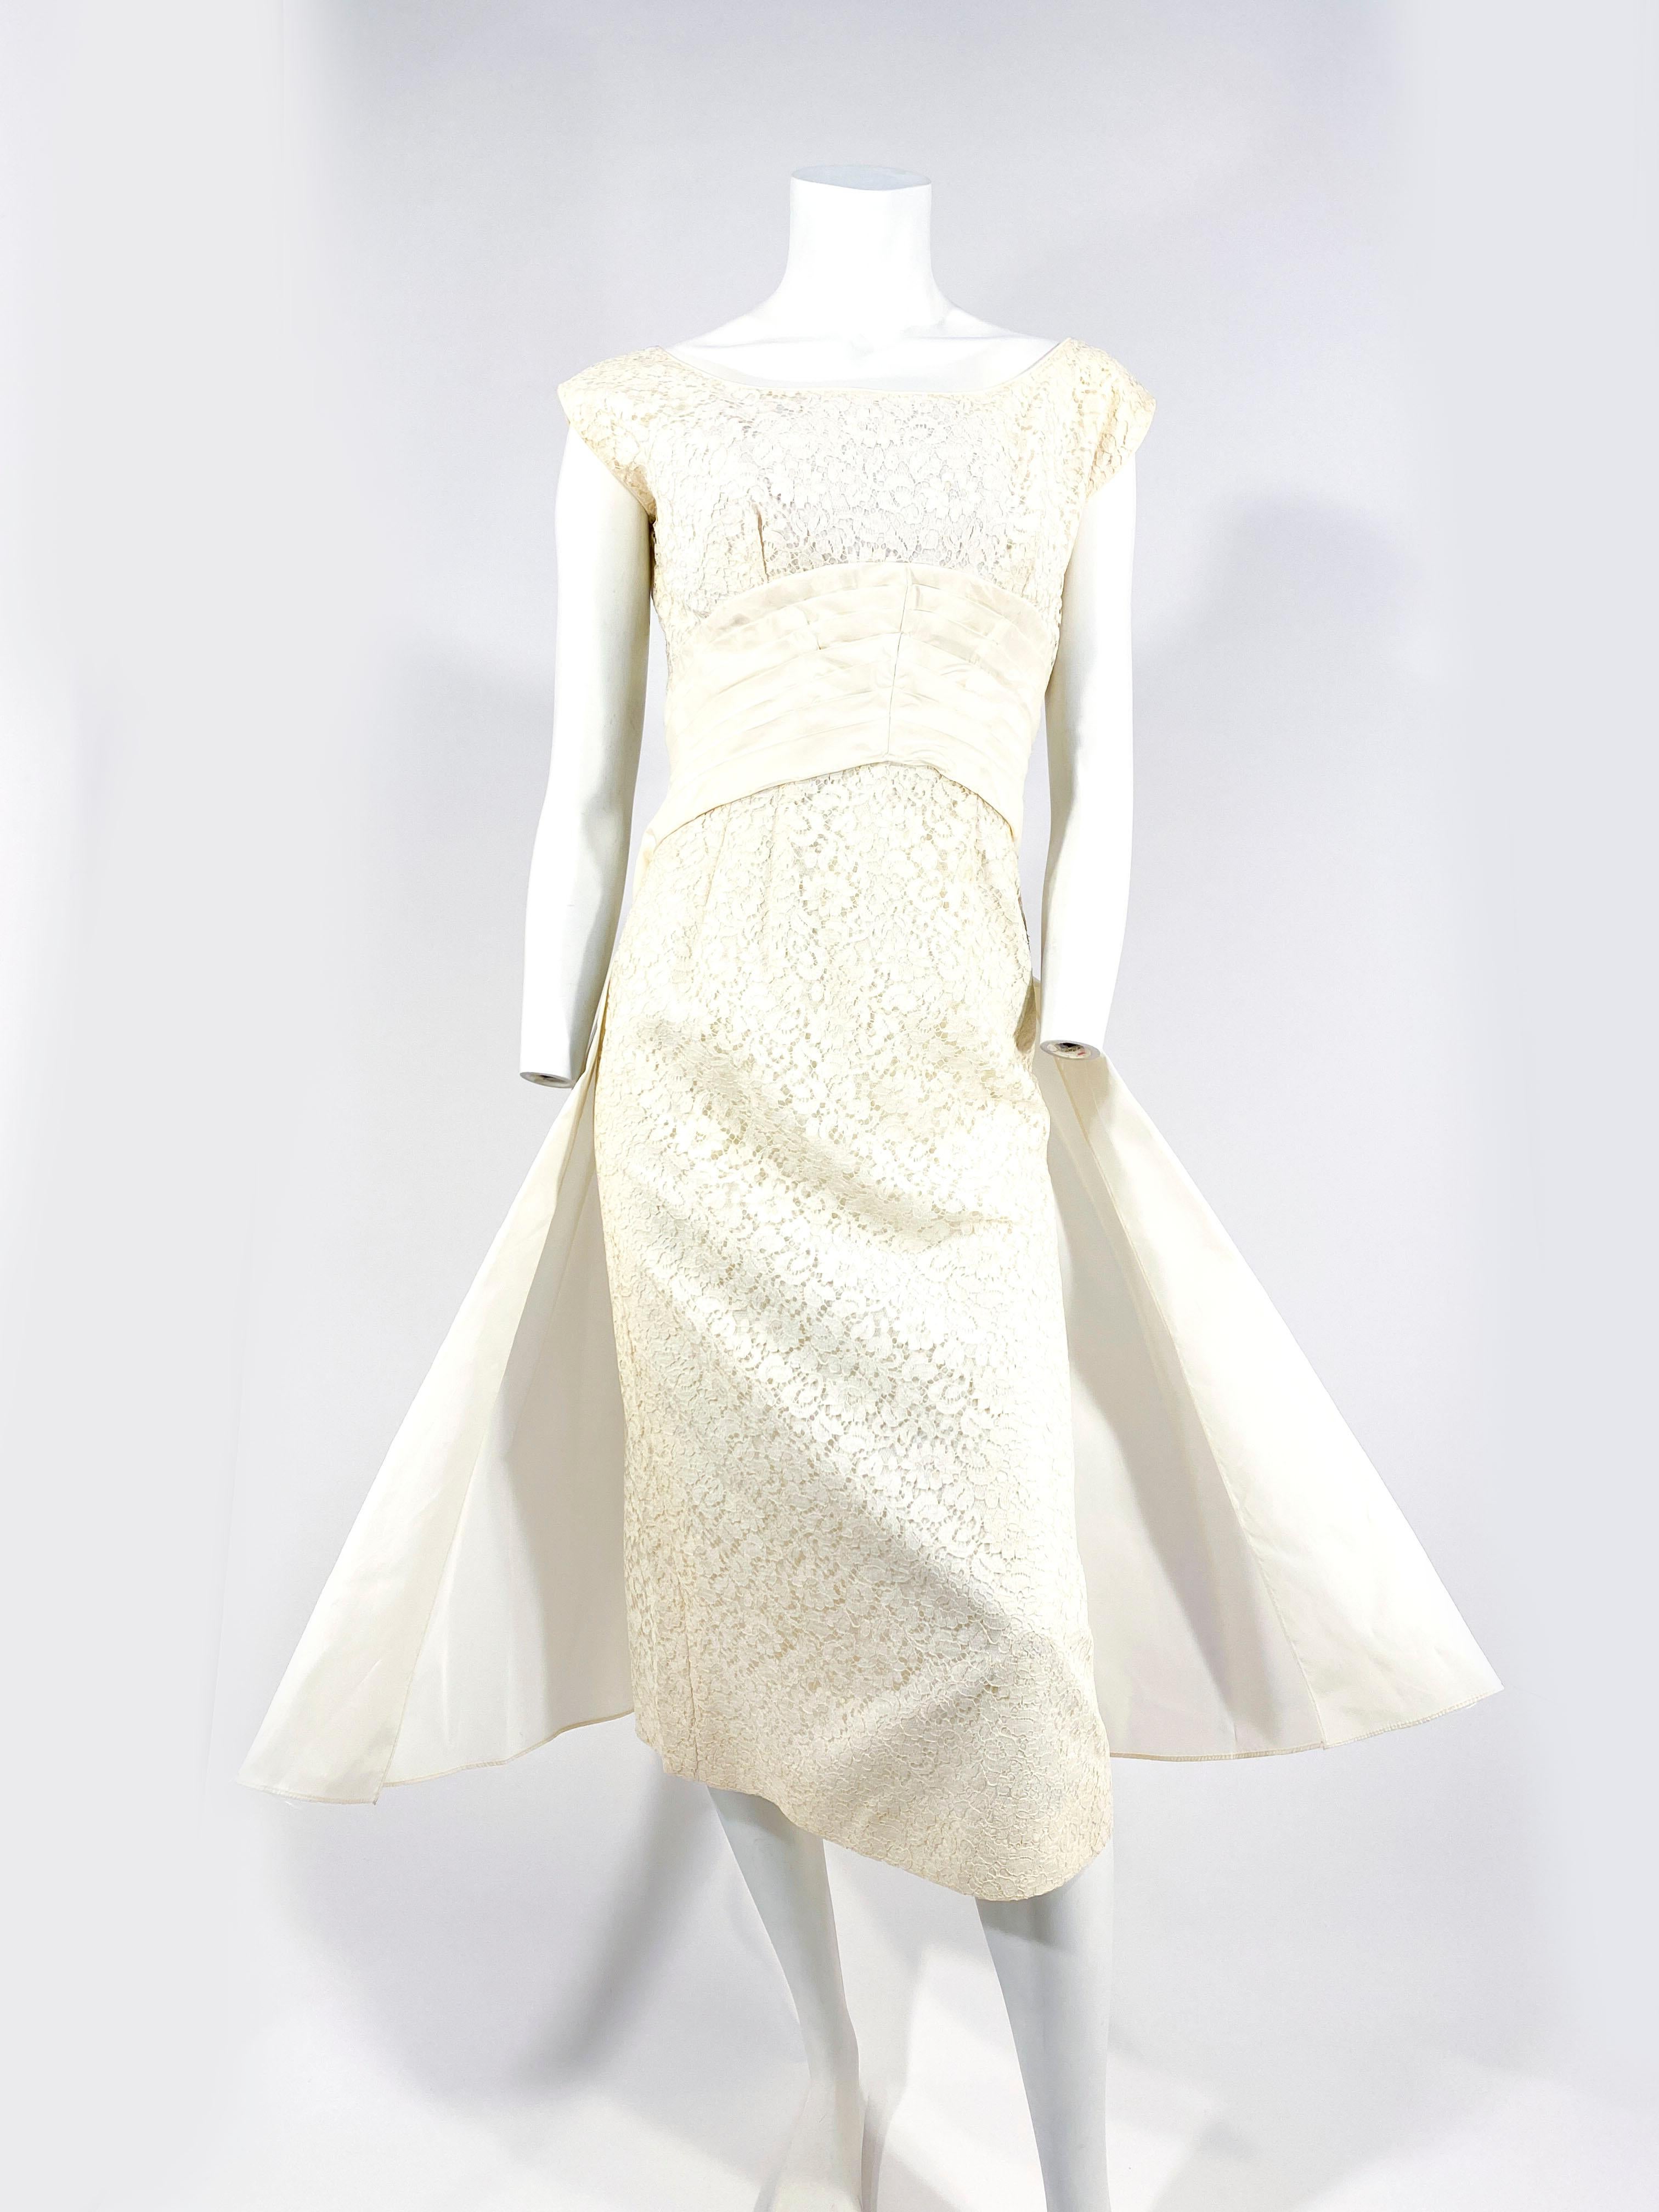 Late 1950s Emma Domb off-white colored lace dress with cap sleeves and full lining. The waist is a hand-pleated taffeta cummerbund that drapes into the back to to full fishtail drape from the back of the waist to the hem of the dress finished with a